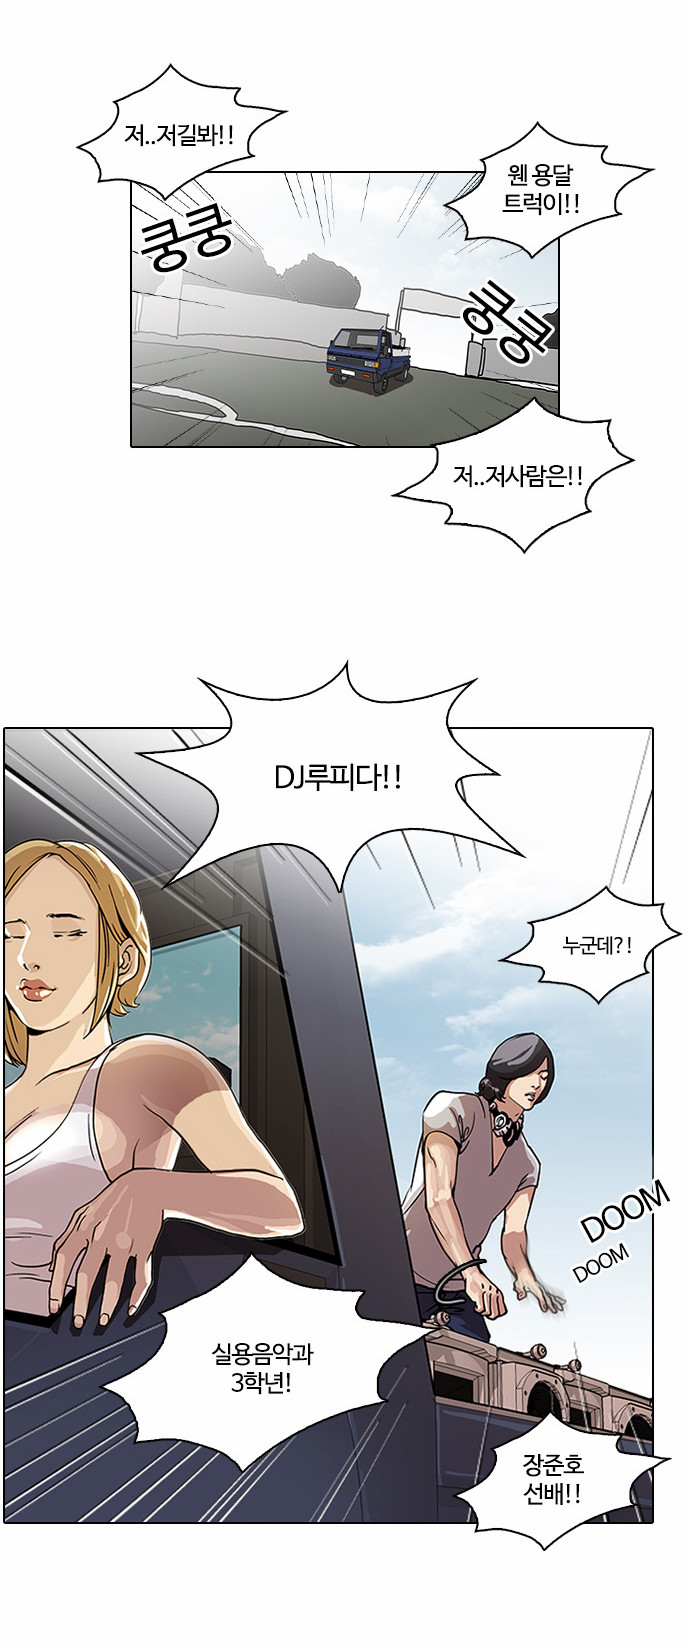 Lookism - Chapter 24 - Page 2